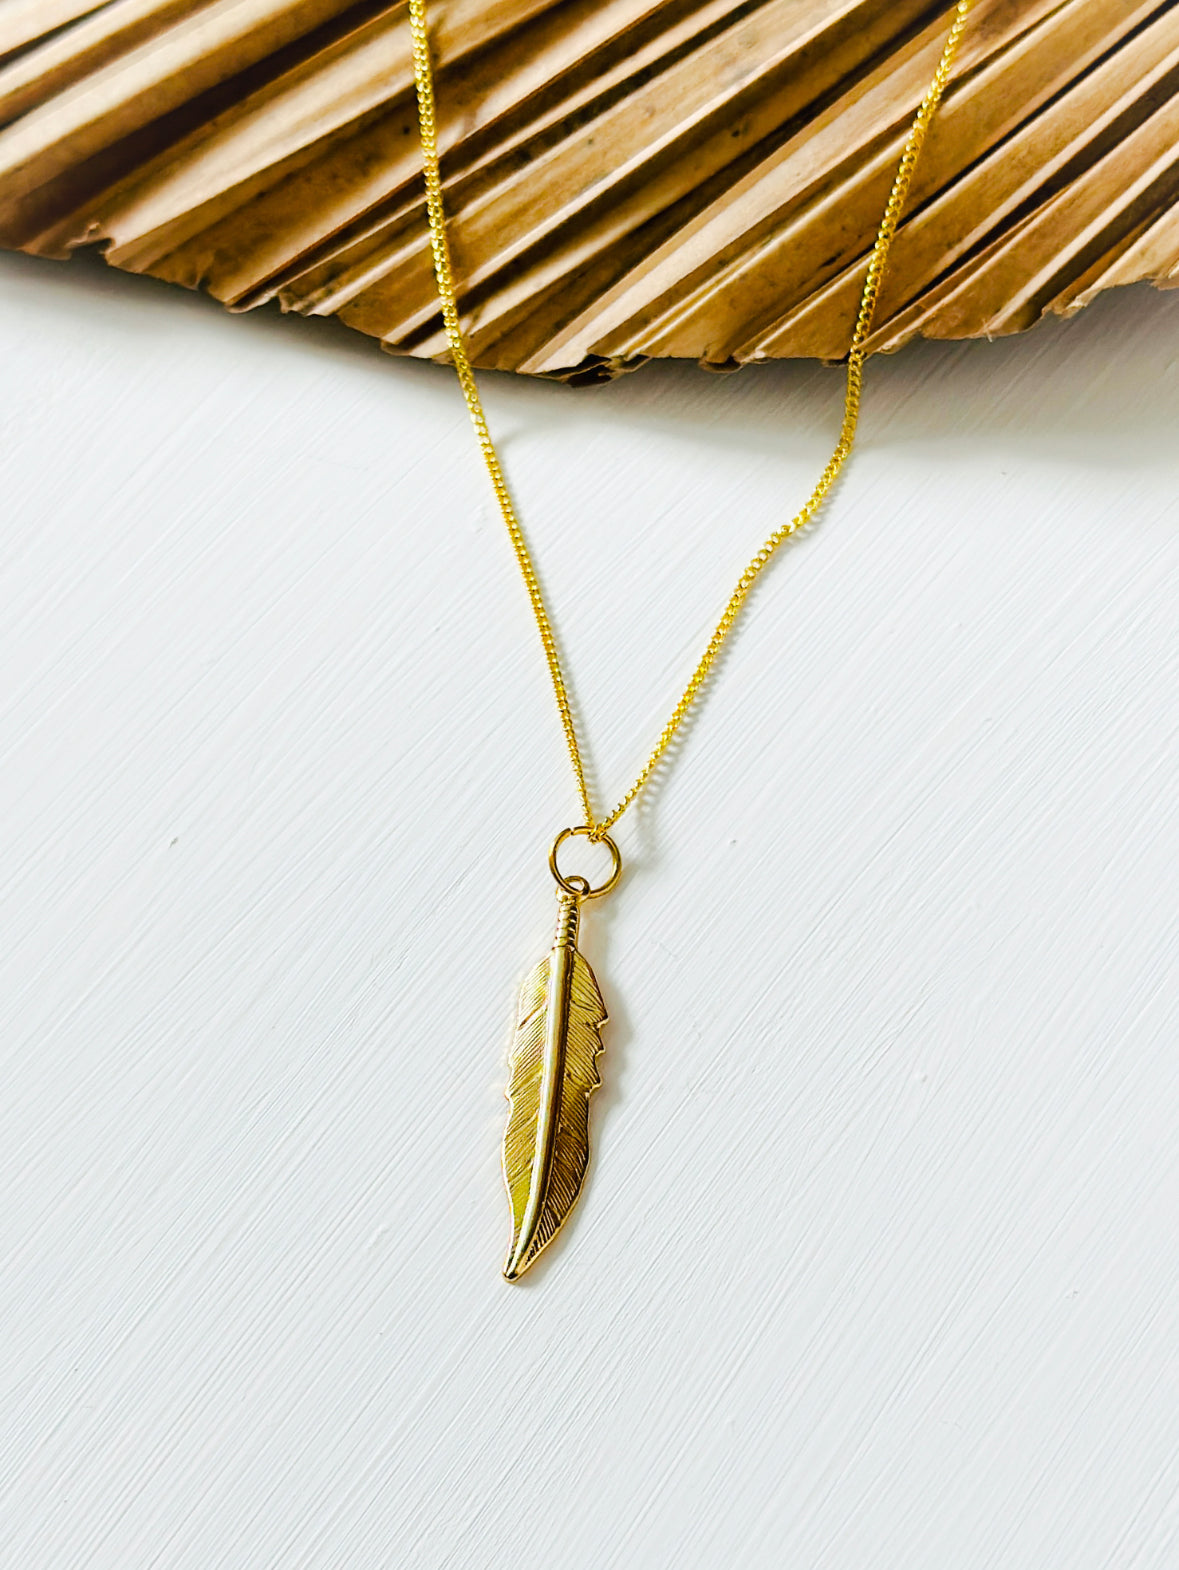 The Gold Feather Necklace